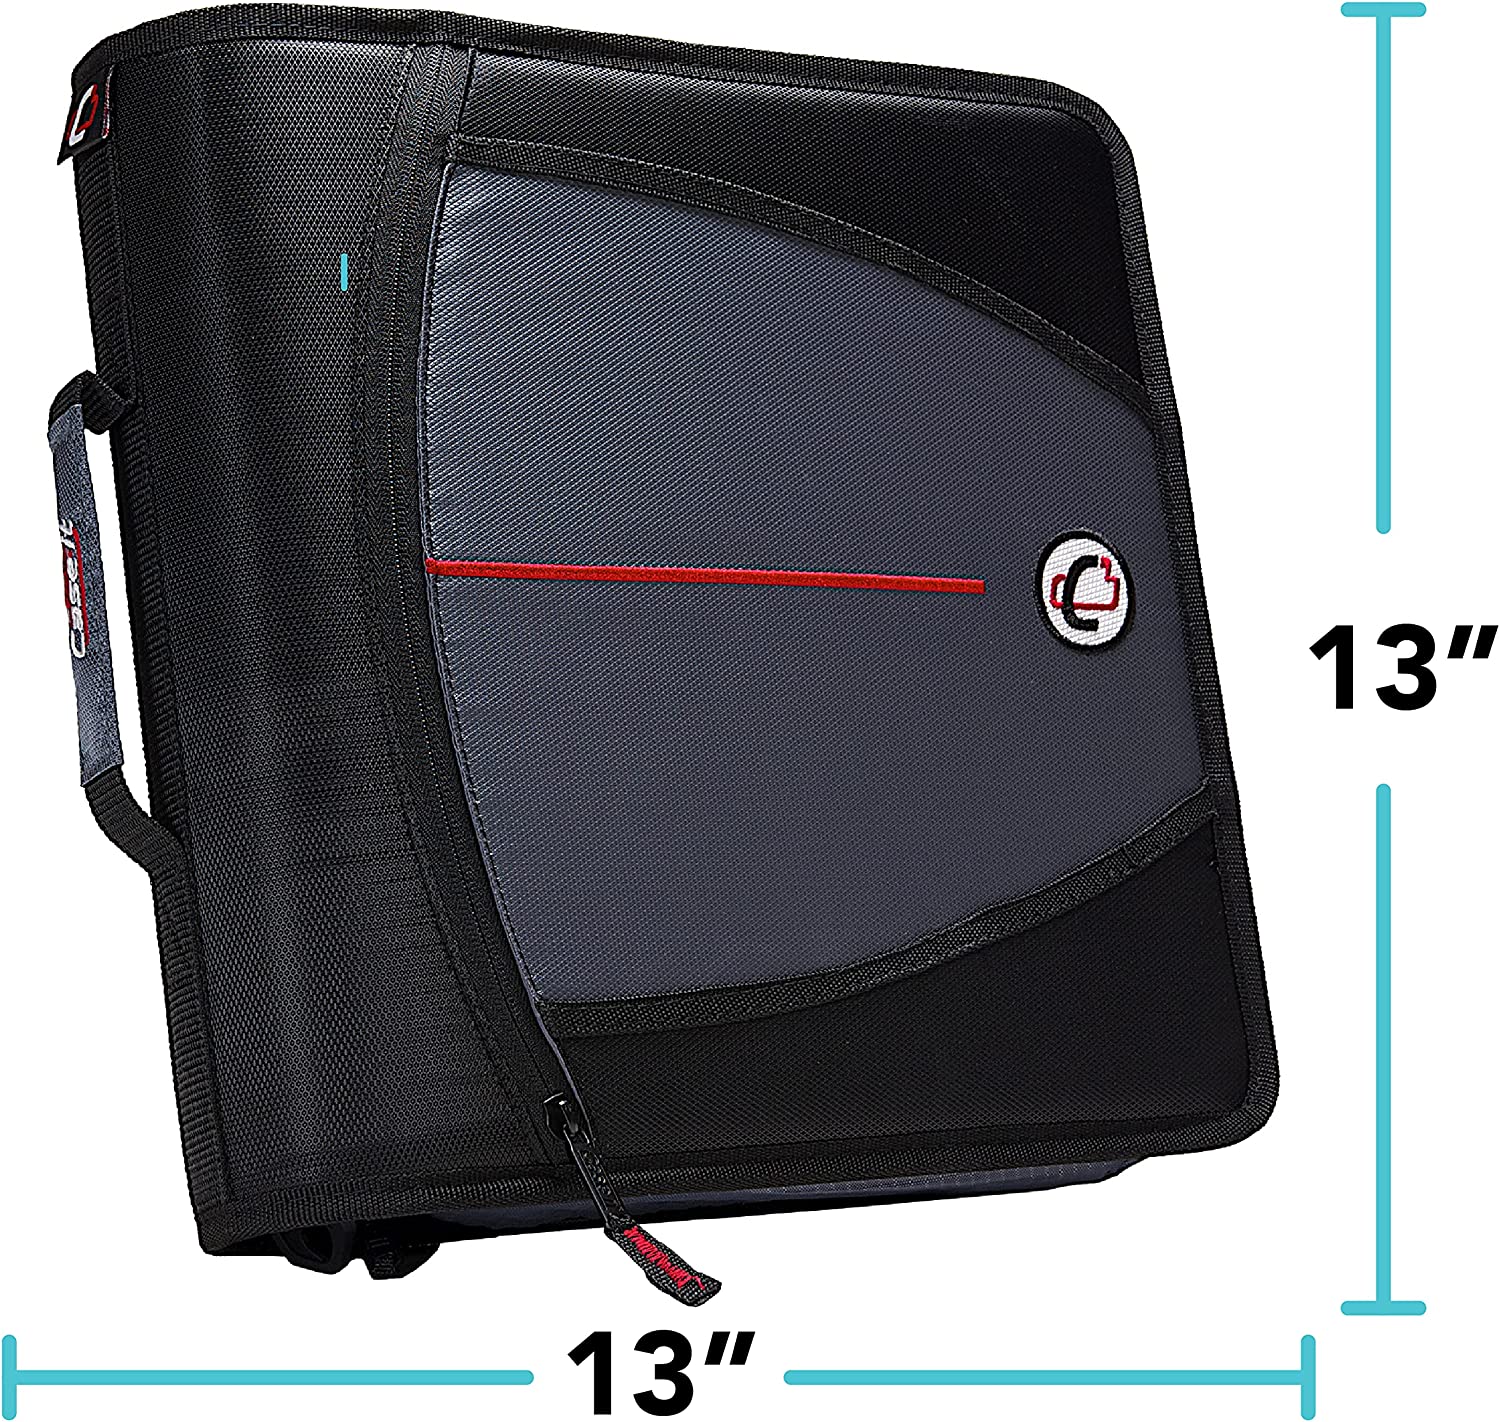 The Mighty Zip Tab Zipper Binder 3 Inch 5 Color Tab Expanding File Folder With Shoulder Strap D-146